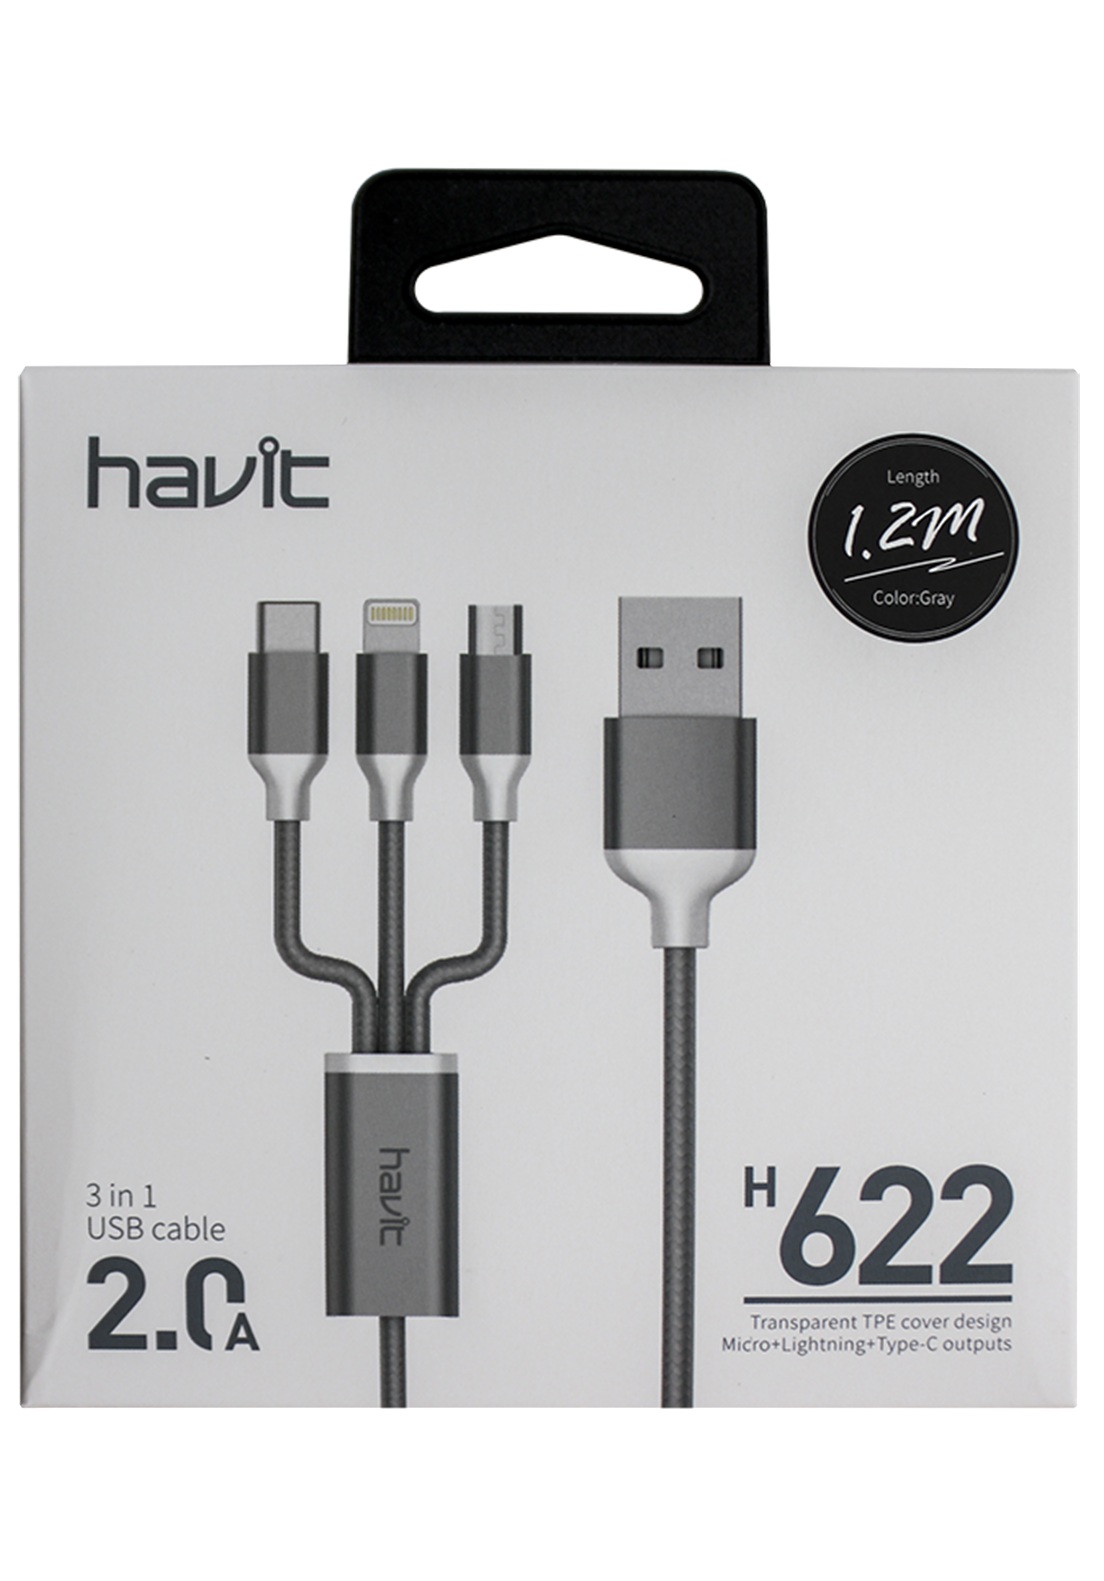 HAVIT HV-H68 USB To Type-C Cable, 2.0A Fast Charger, Black